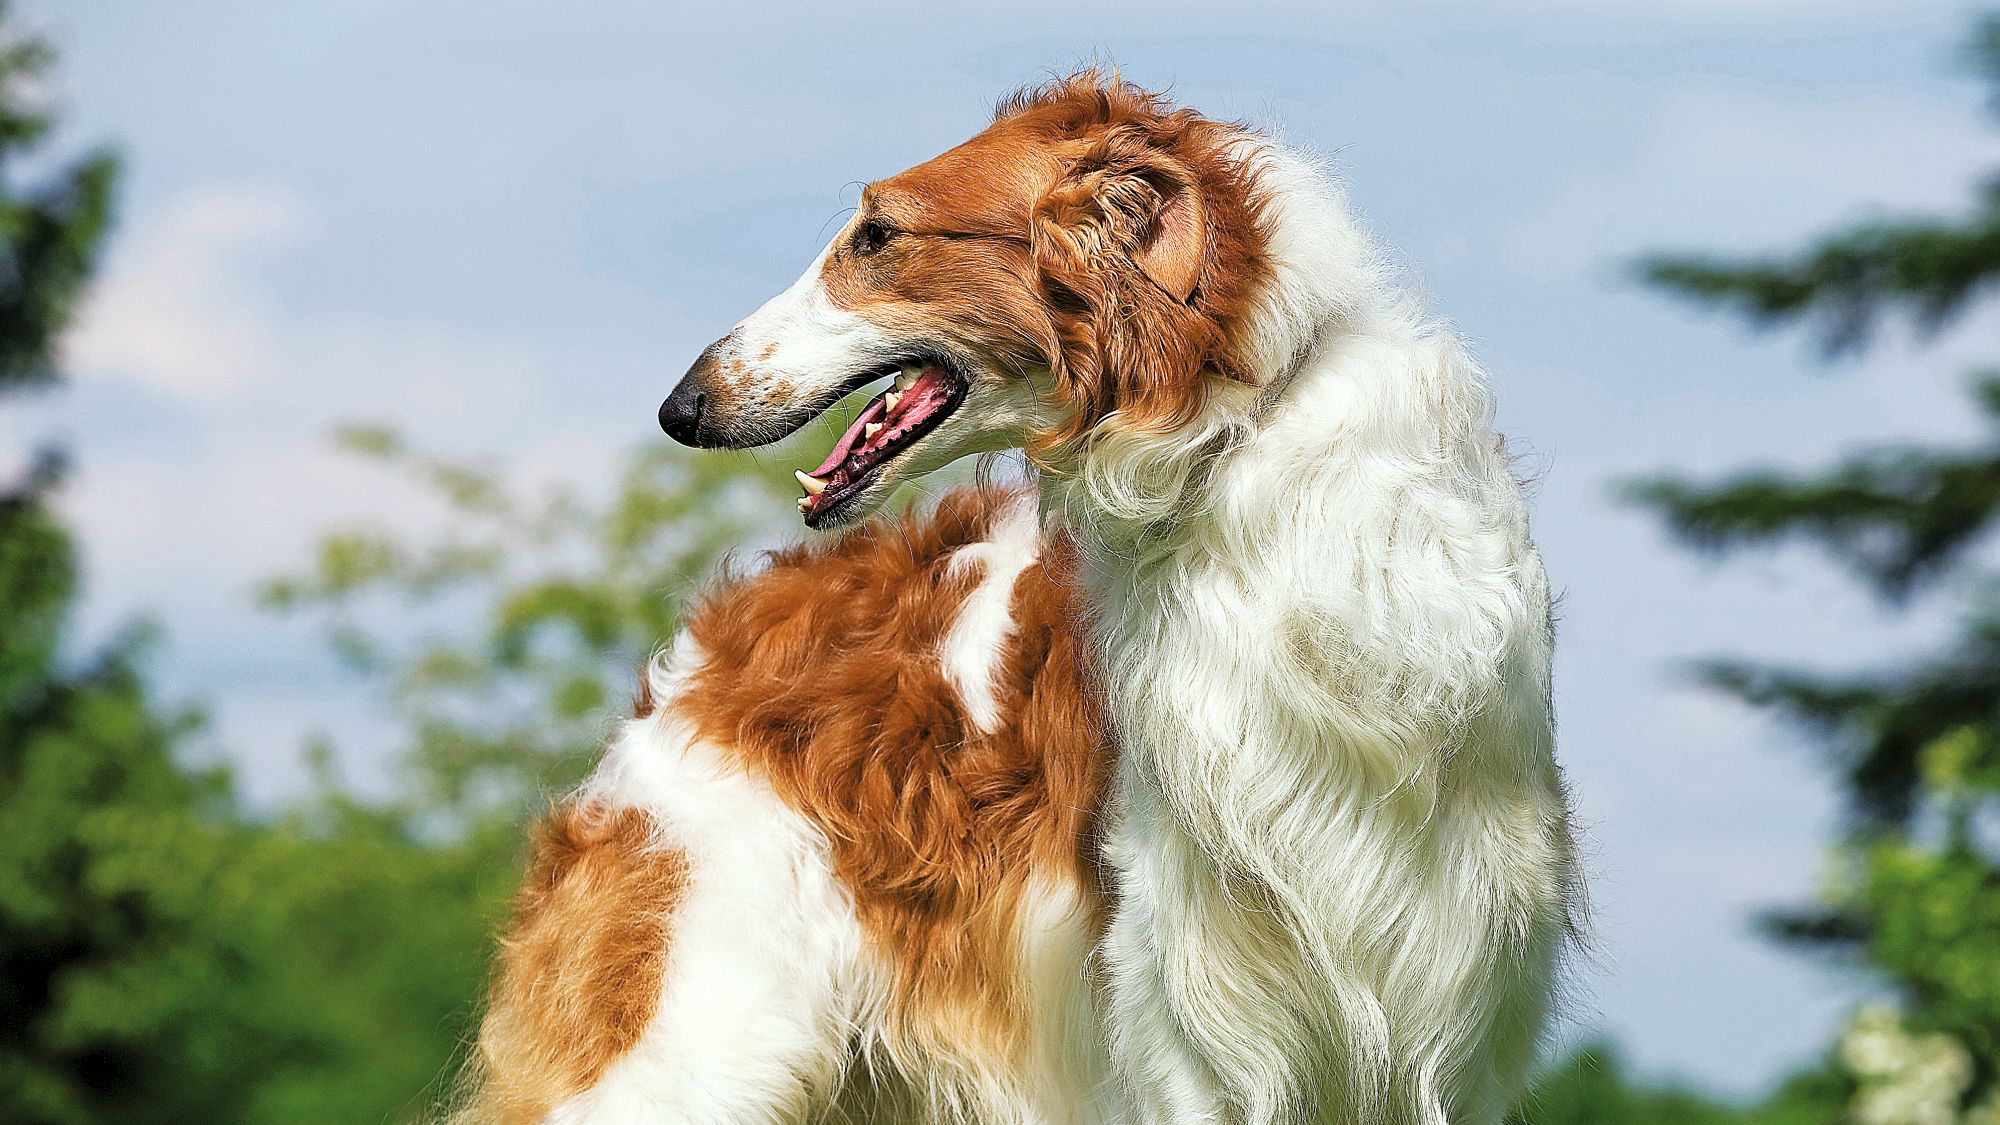 A Borzoi stood in the grass with head turned to the left